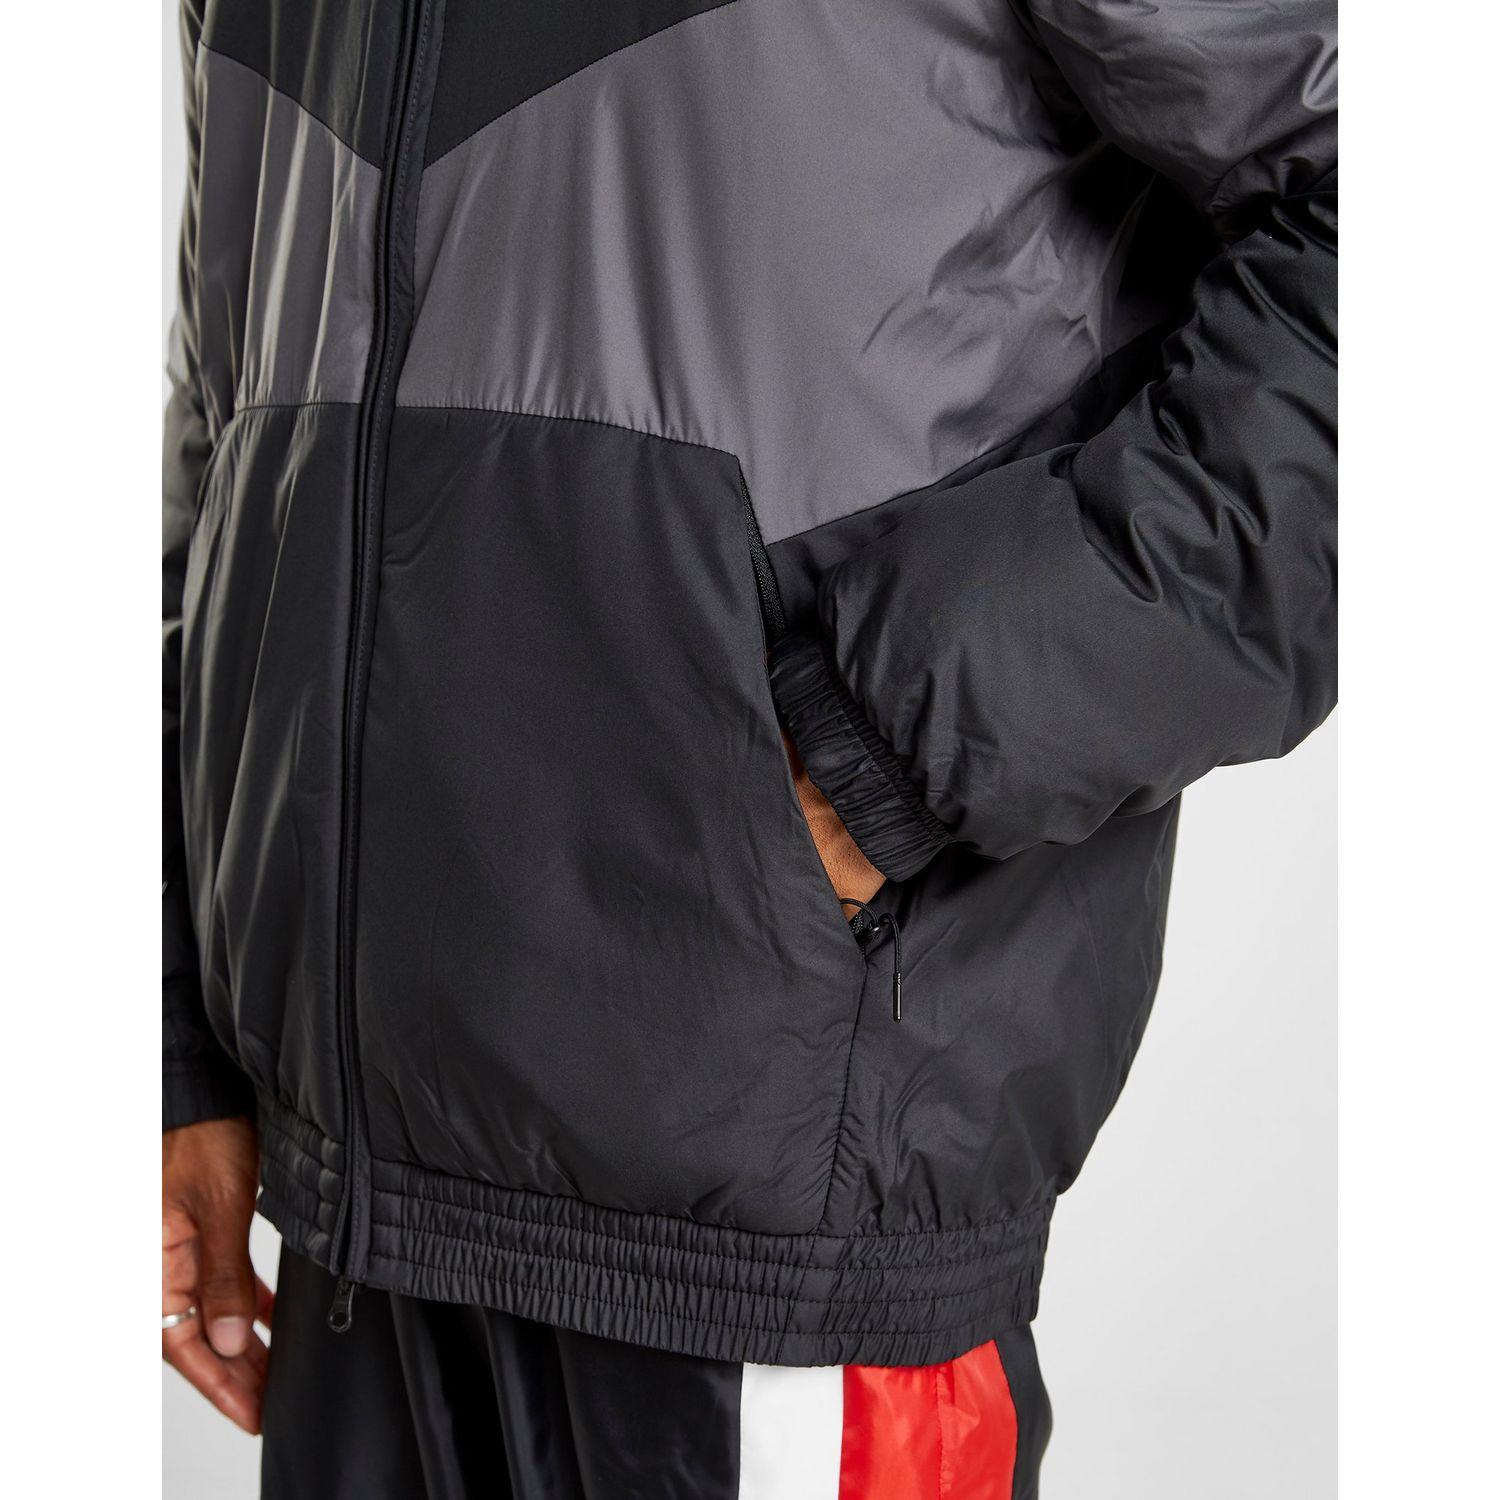 Nike Syth Breakout Jacket in Gray for Men - Lyst